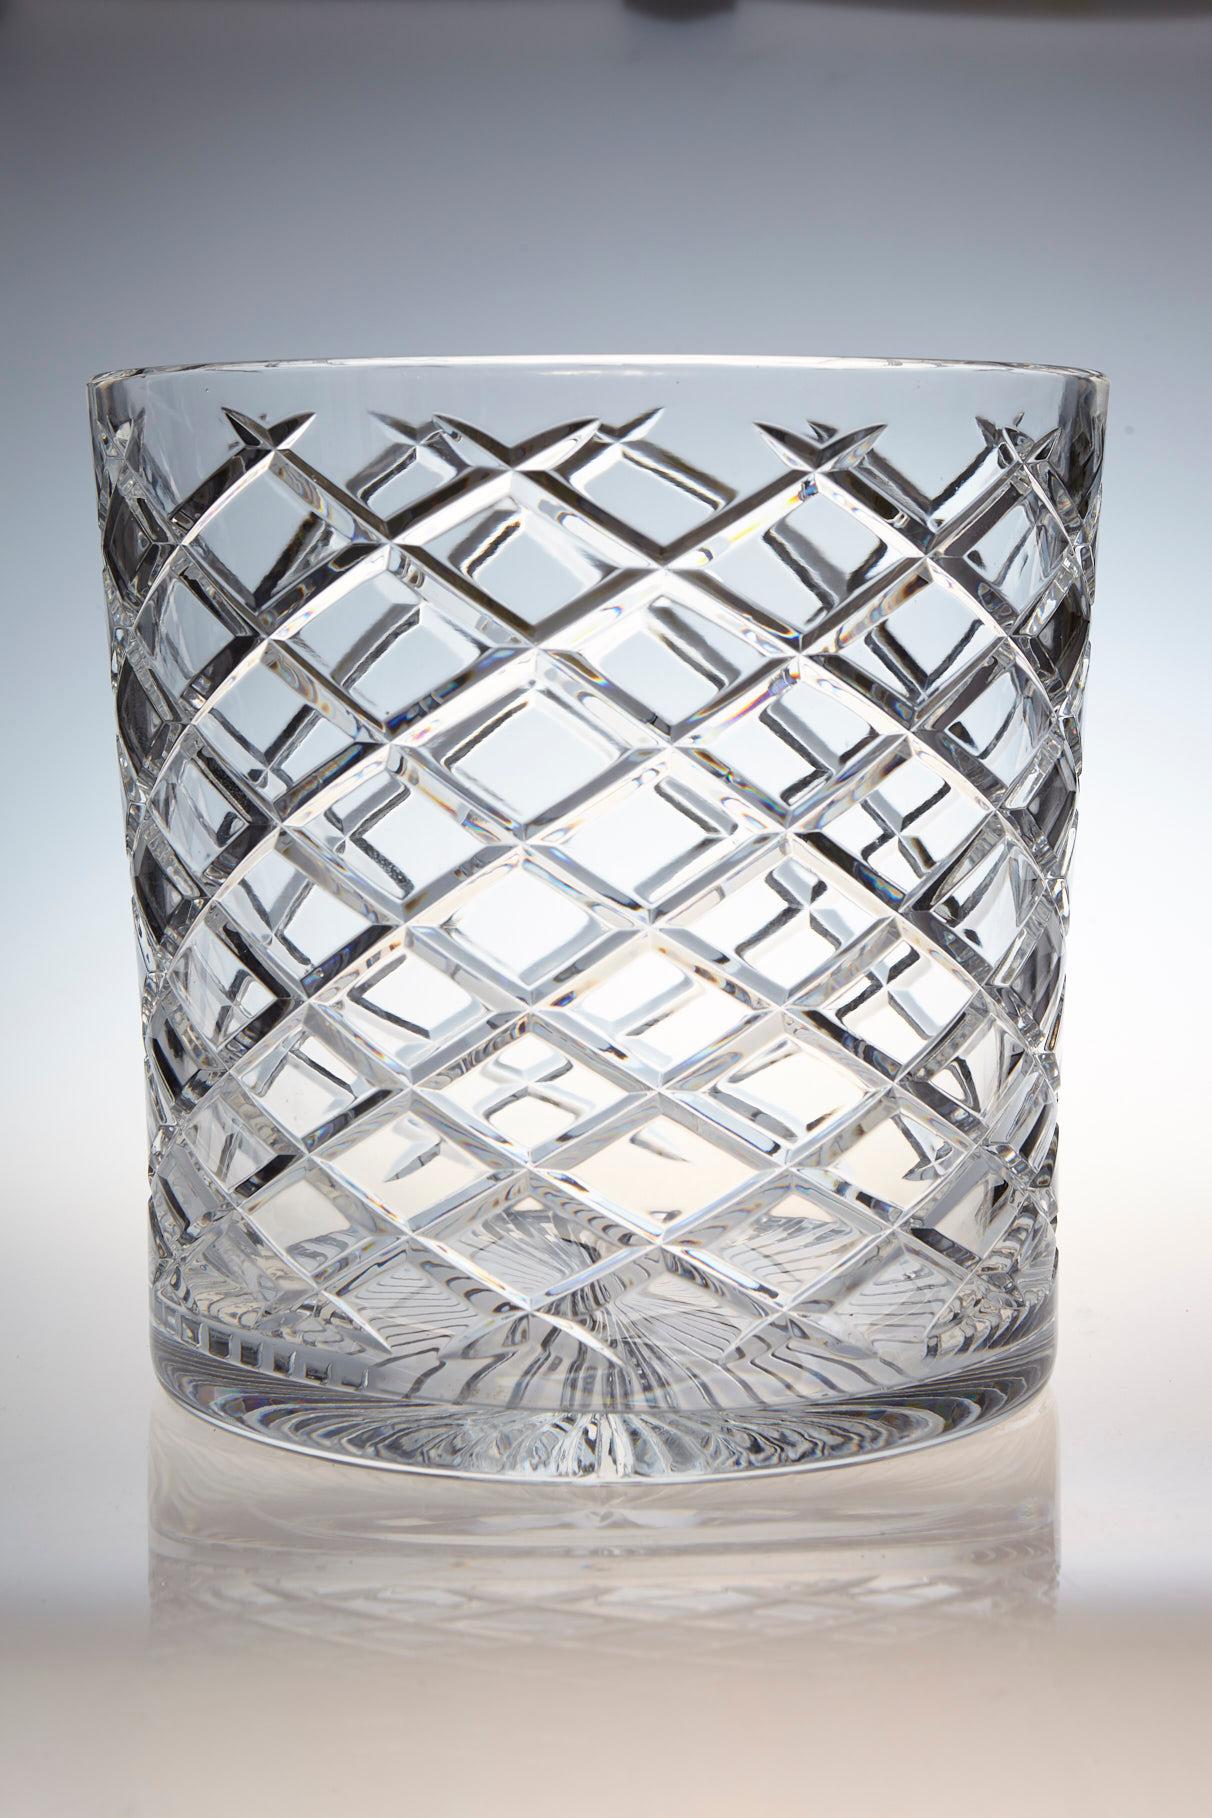 Extremely heavy and impressive French crystal wine cooler or champagne ice bucket for two bottles, with a diamond cut design. The diameter is 9.75 inches. The ice bucket is in excellent condition. France, circa 1960s.

 